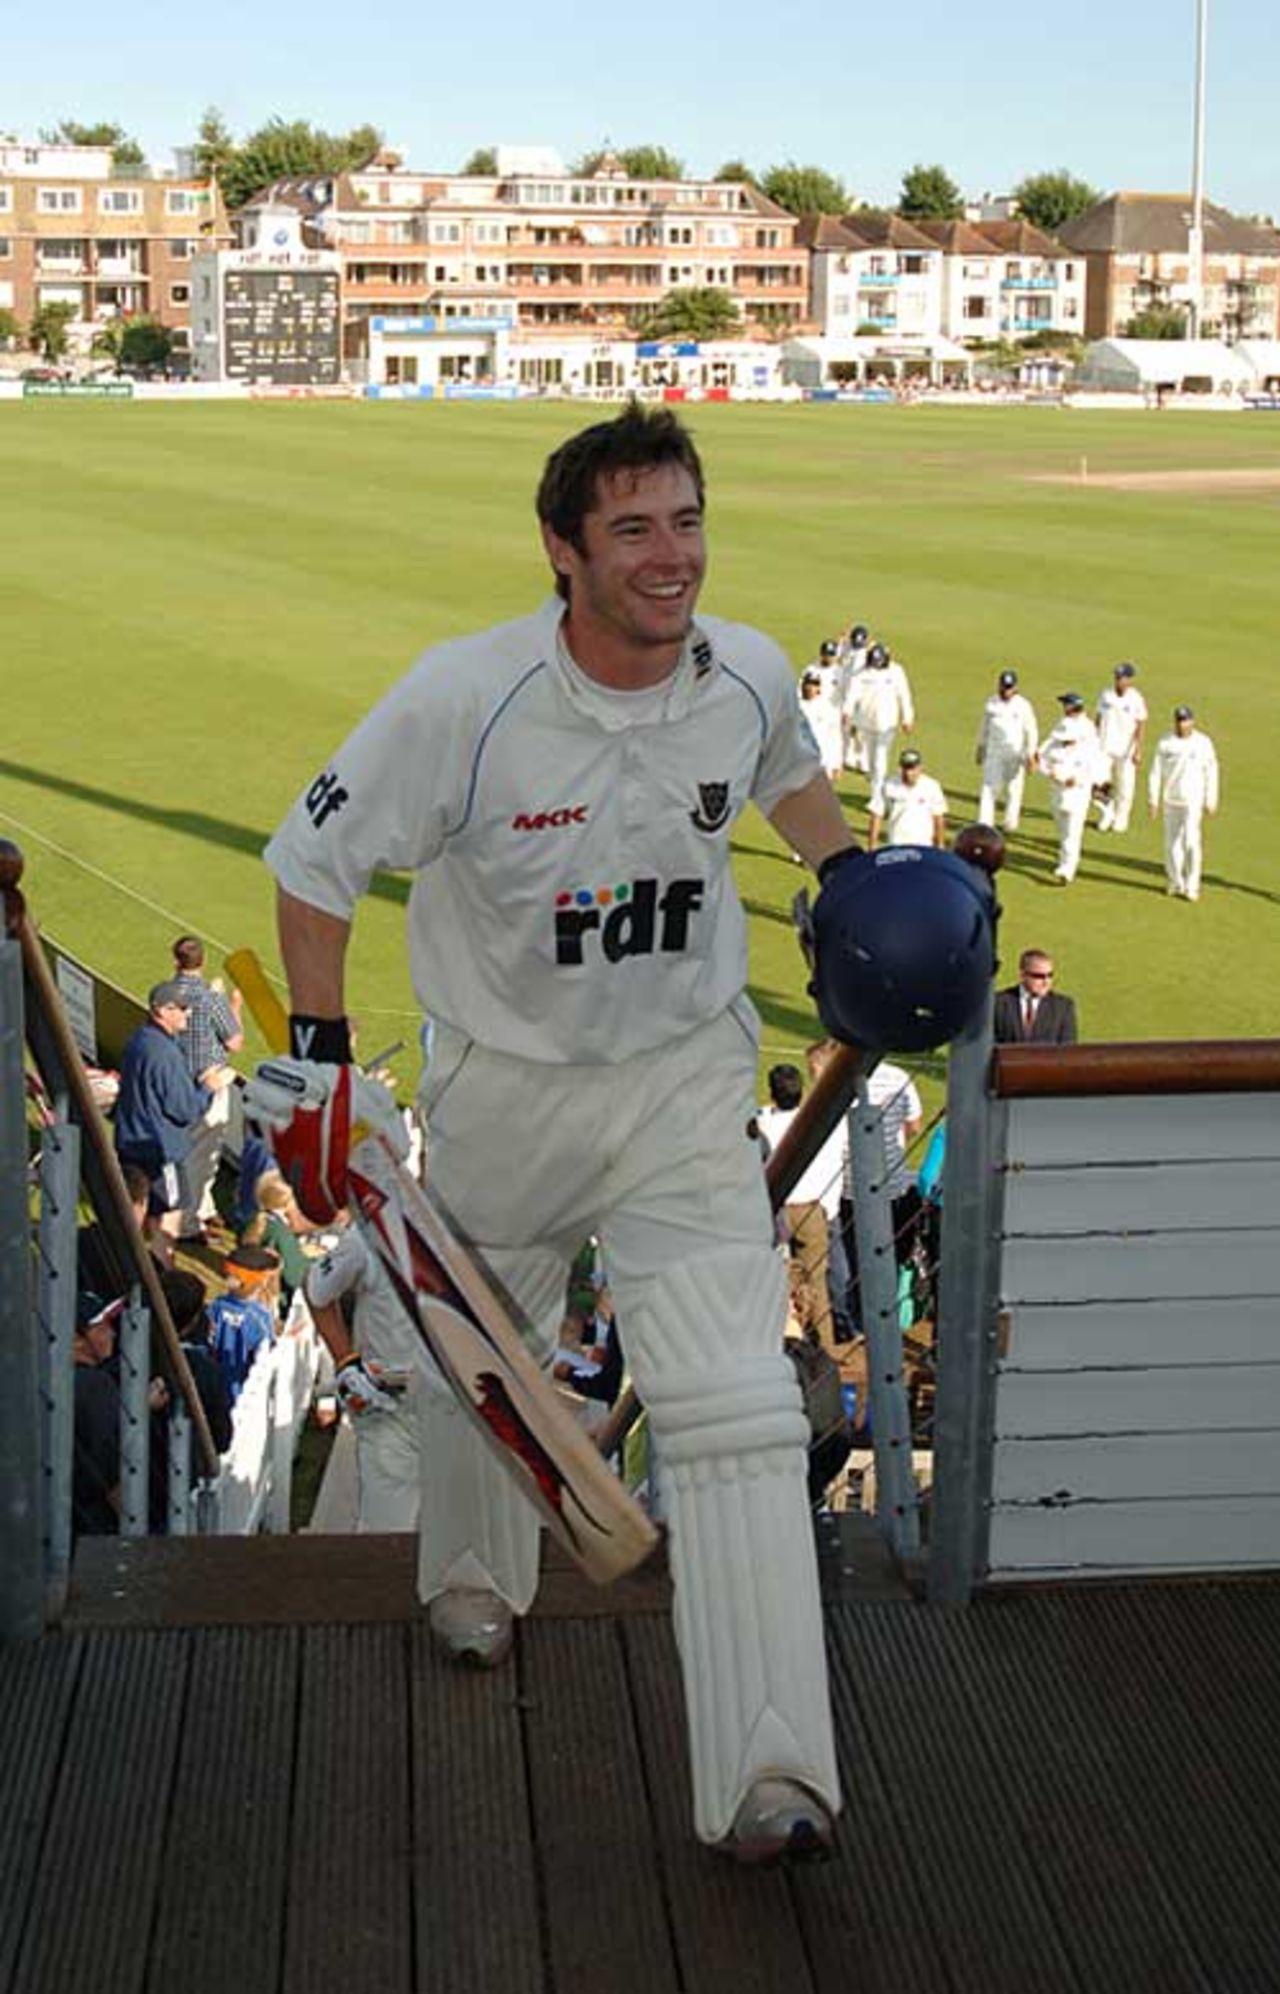 Andrew Hodd walks off after completing his century against the Indians, Sussex v Indians, Tour match, Hove, July 9, 2007